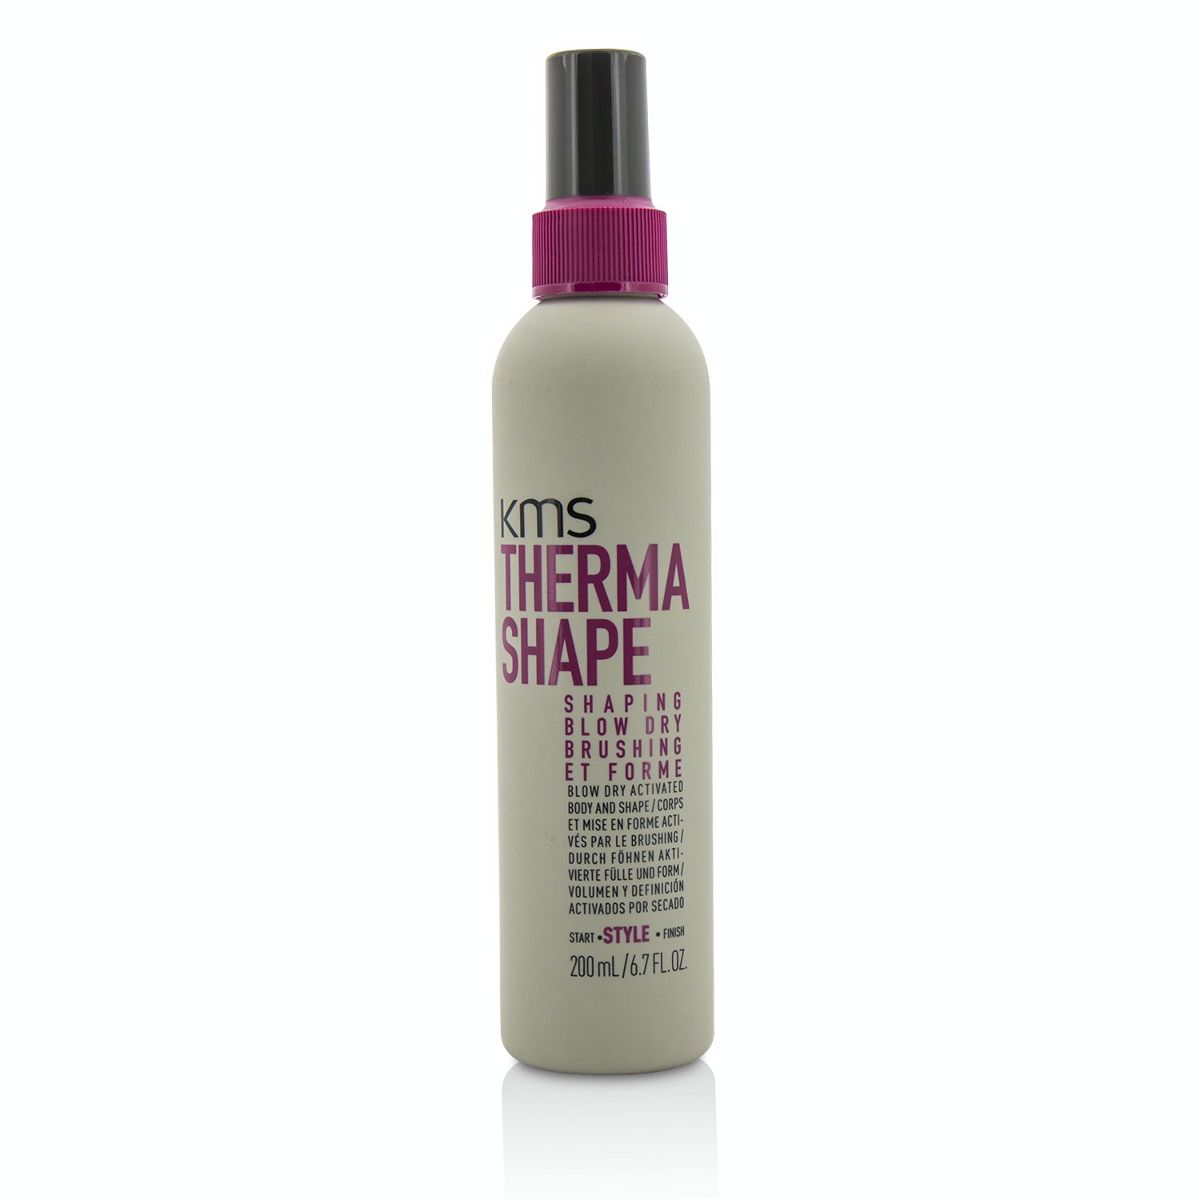 Therma Shape Shaping Blow Dry Brushing (Blow Dry Activated Body and Shape) KMS California Image